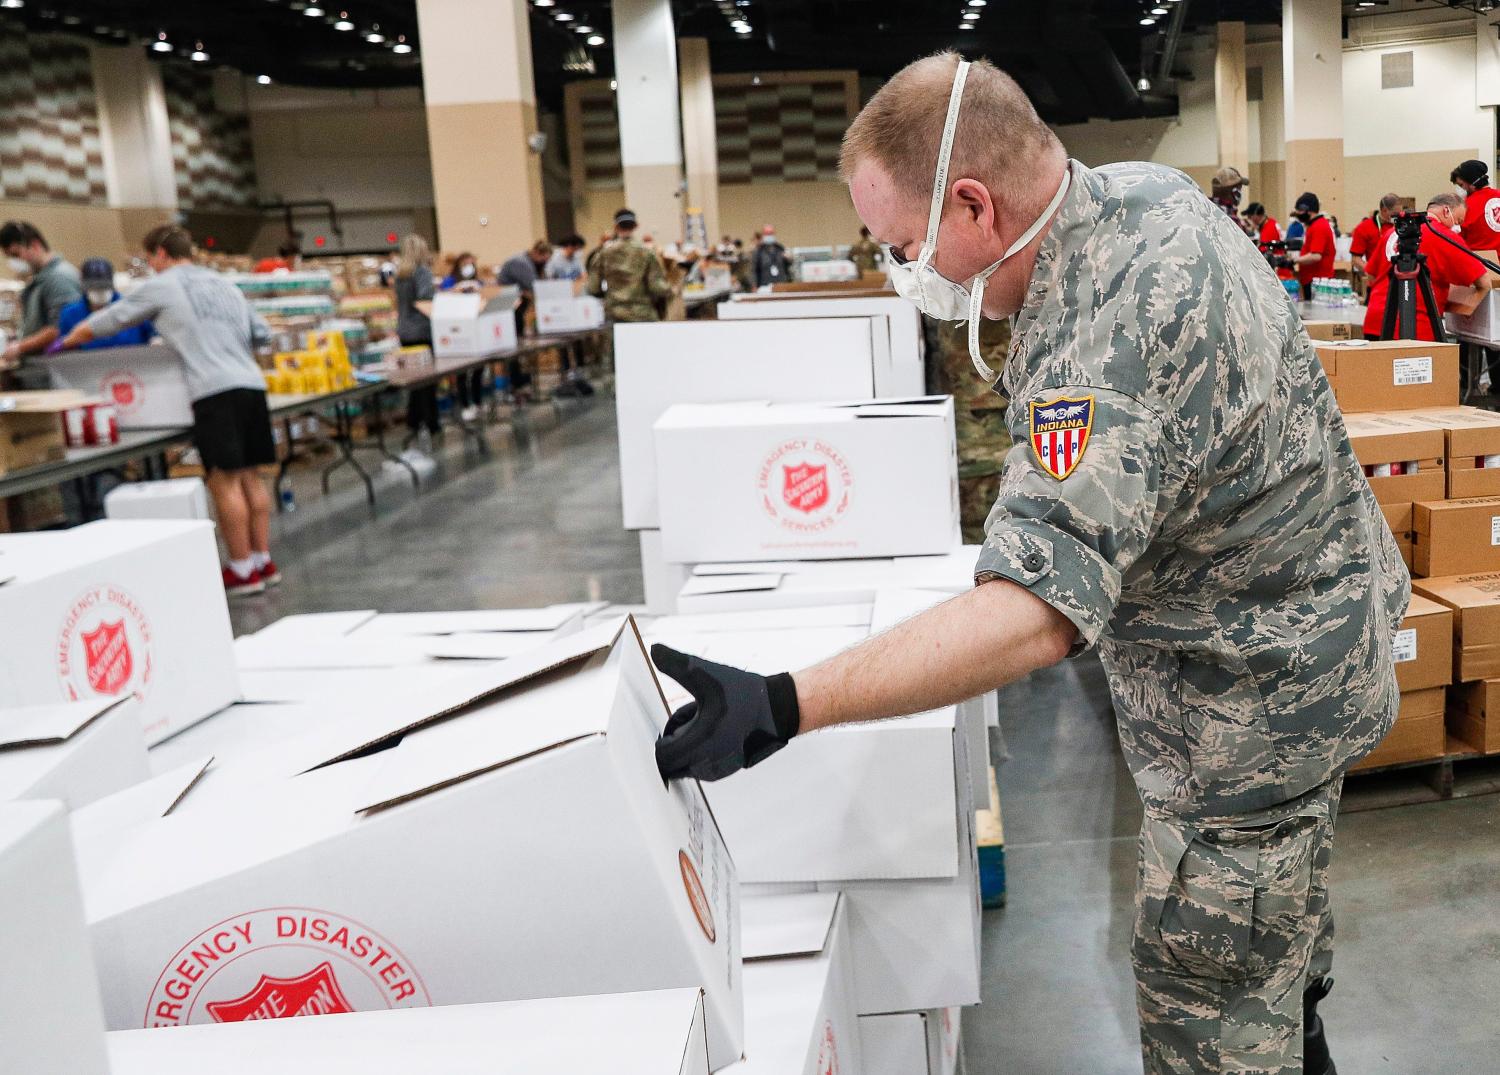 Indiana National Guard Second Lt. Joseph Parnin picks up empty boxes at Lucas Oil Stadium, Indianapolis, Friday, April 17, 2020. The food boxes will be filled with shelf-stable items designed to help supplement the pantries of families who are struggling due to COVID-19 shut-downs.Ini Meals